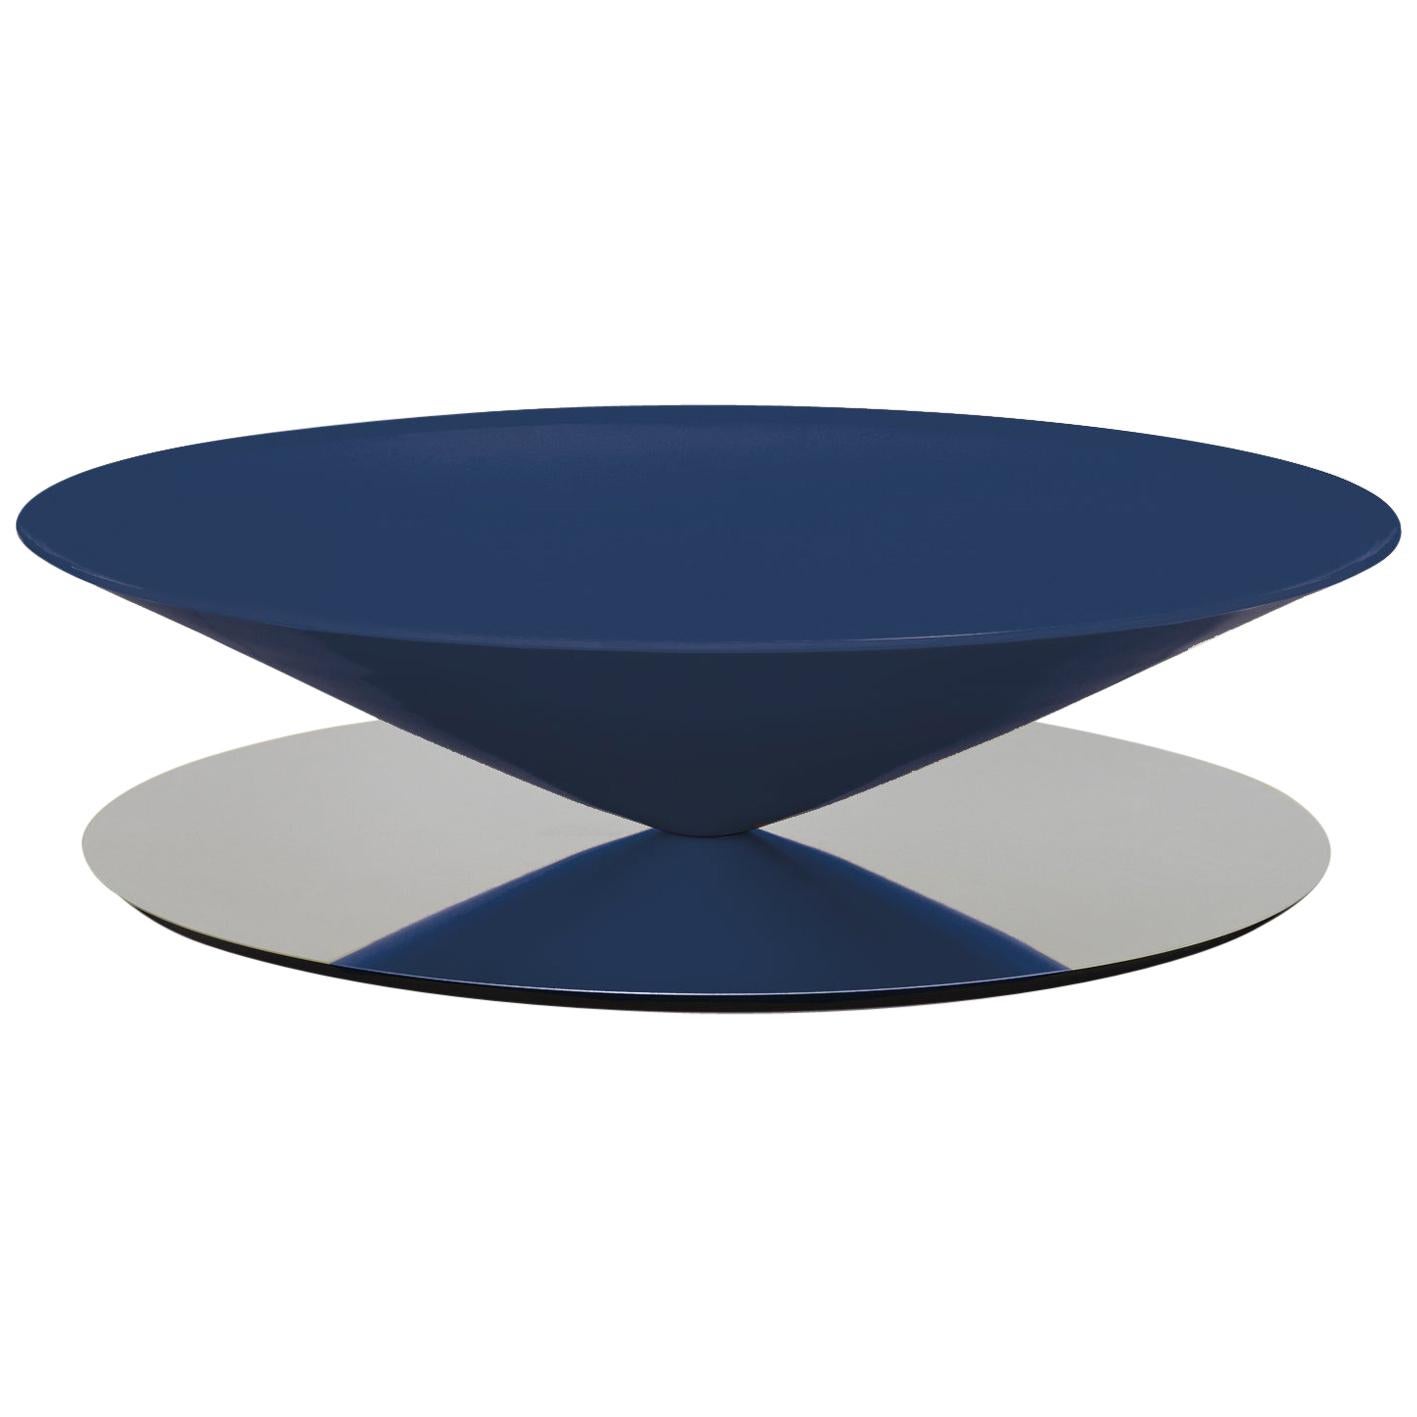 Lacquered Steel "Float" Coffee Table, Luca Nichetto